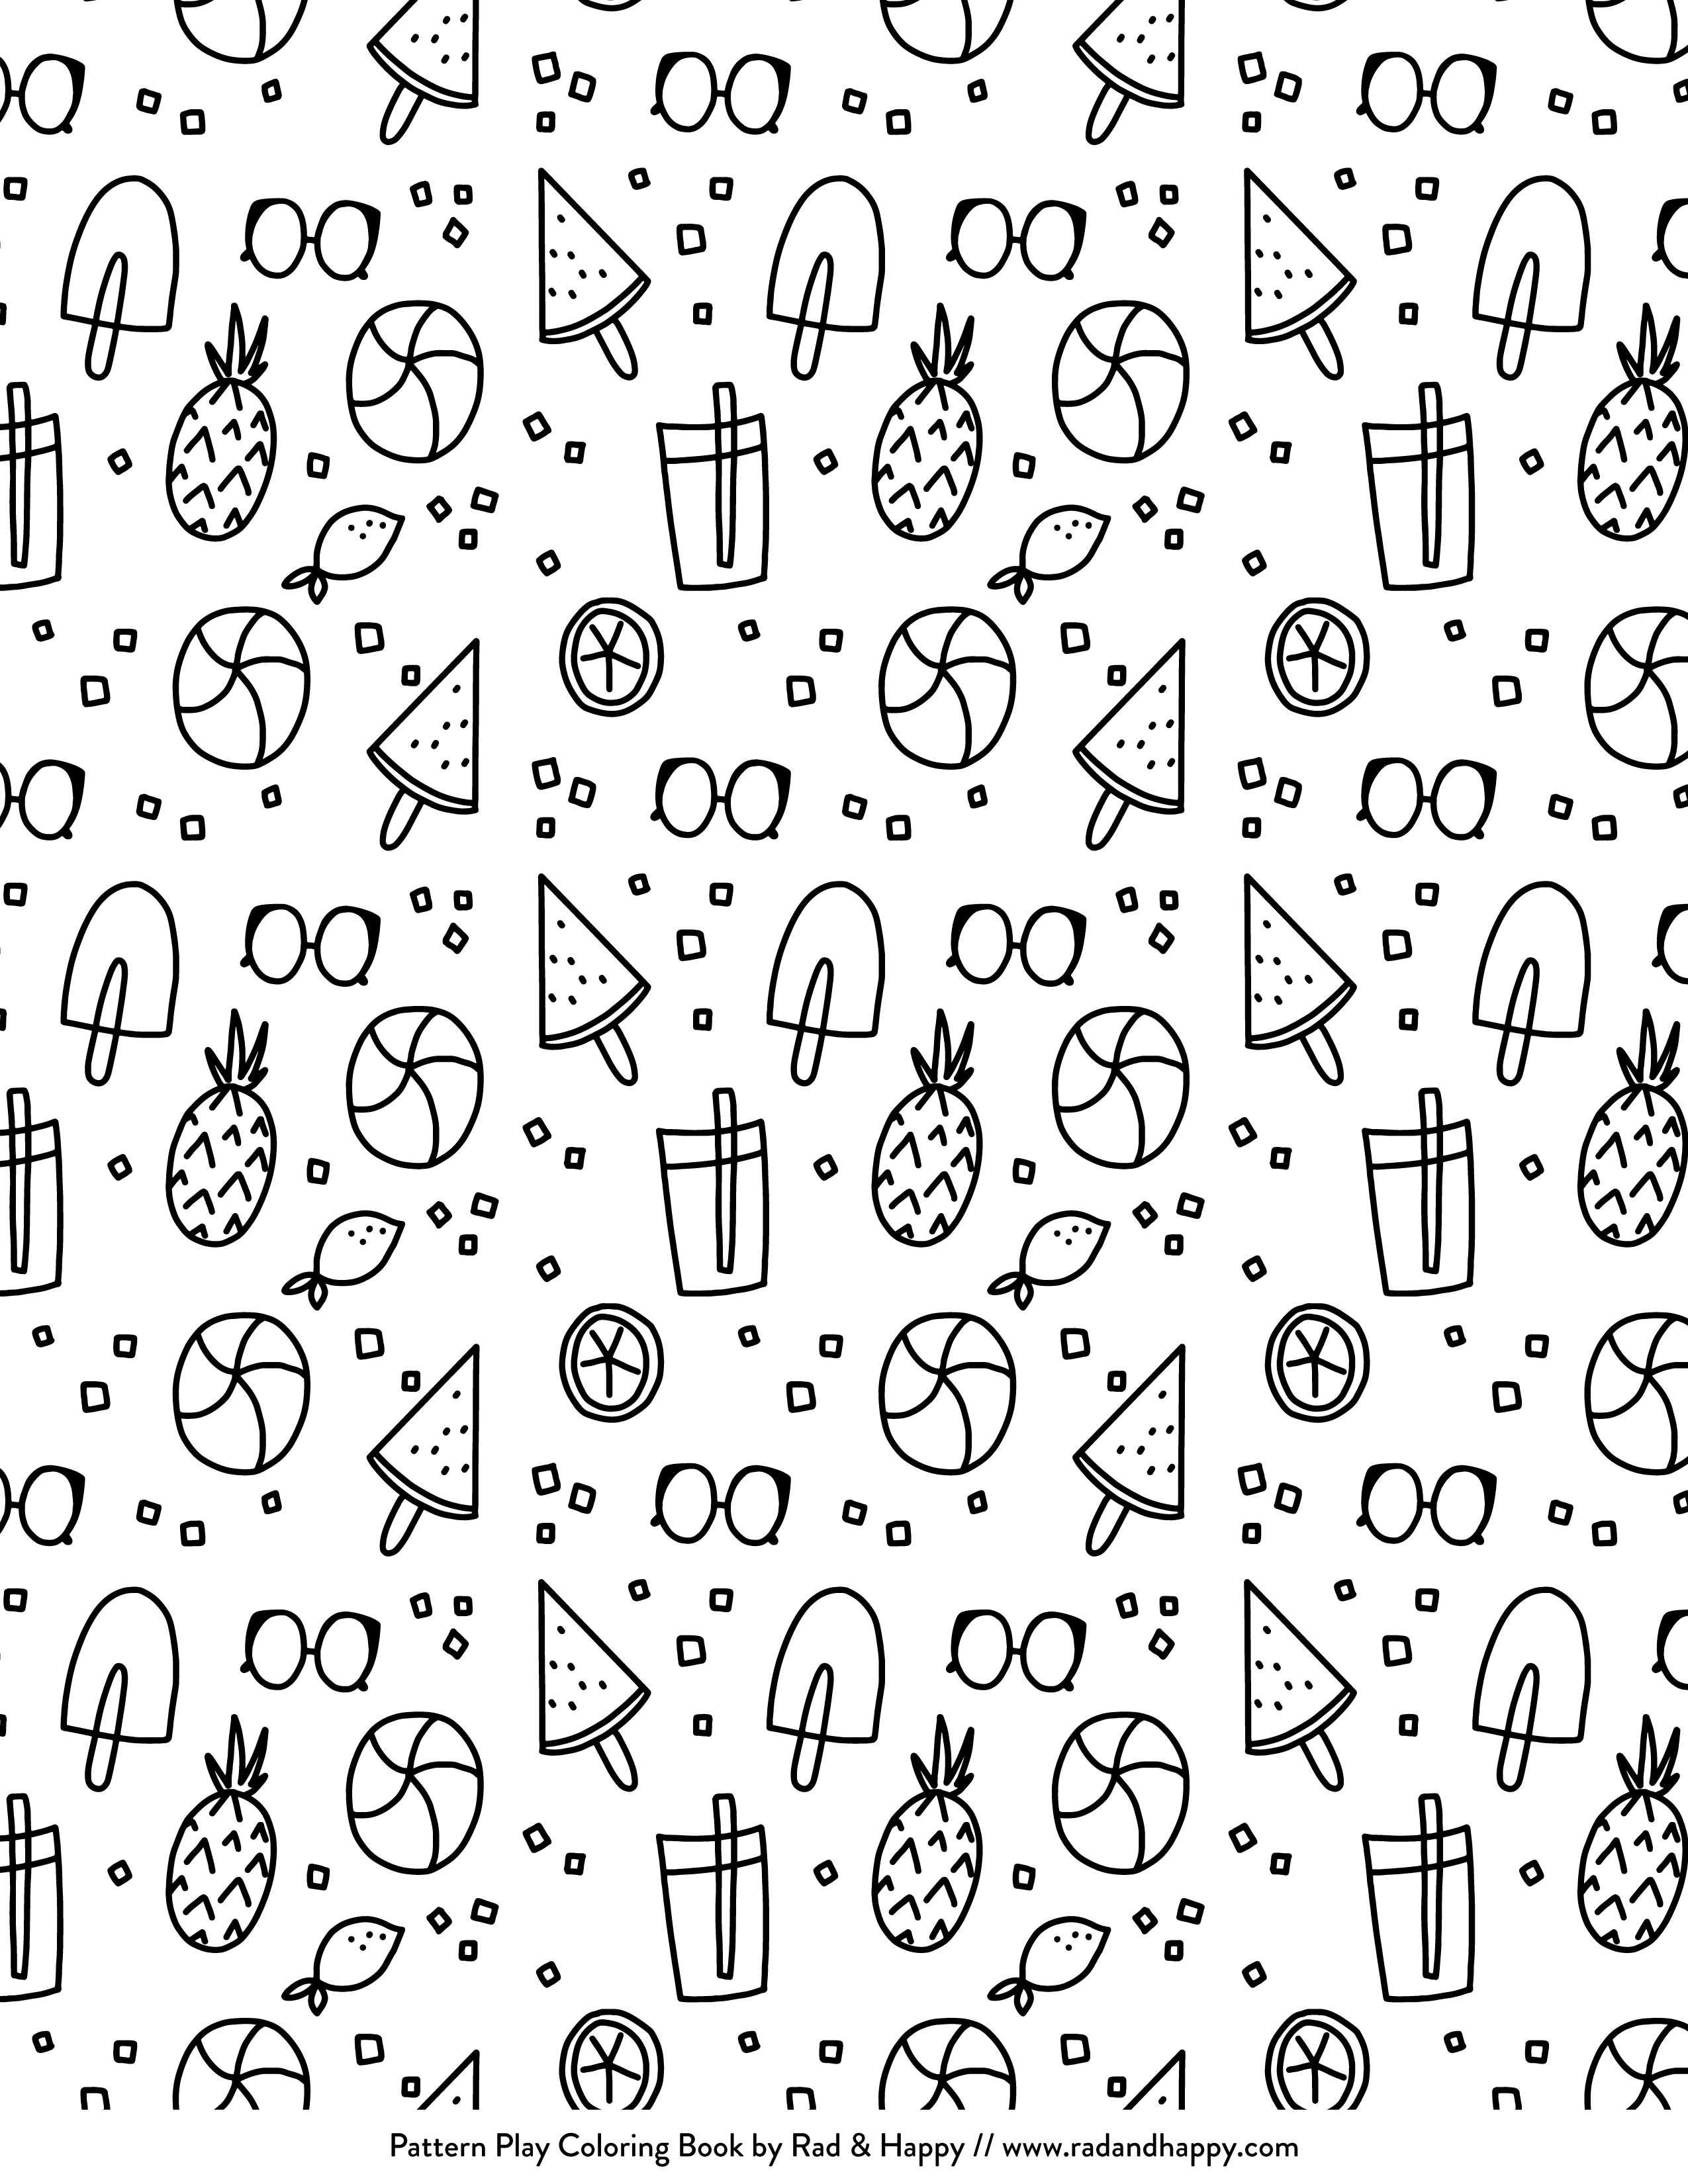 Printable coloring pages for summer: Pattern play printable coloring page | Rad & Happy via Studio DIY